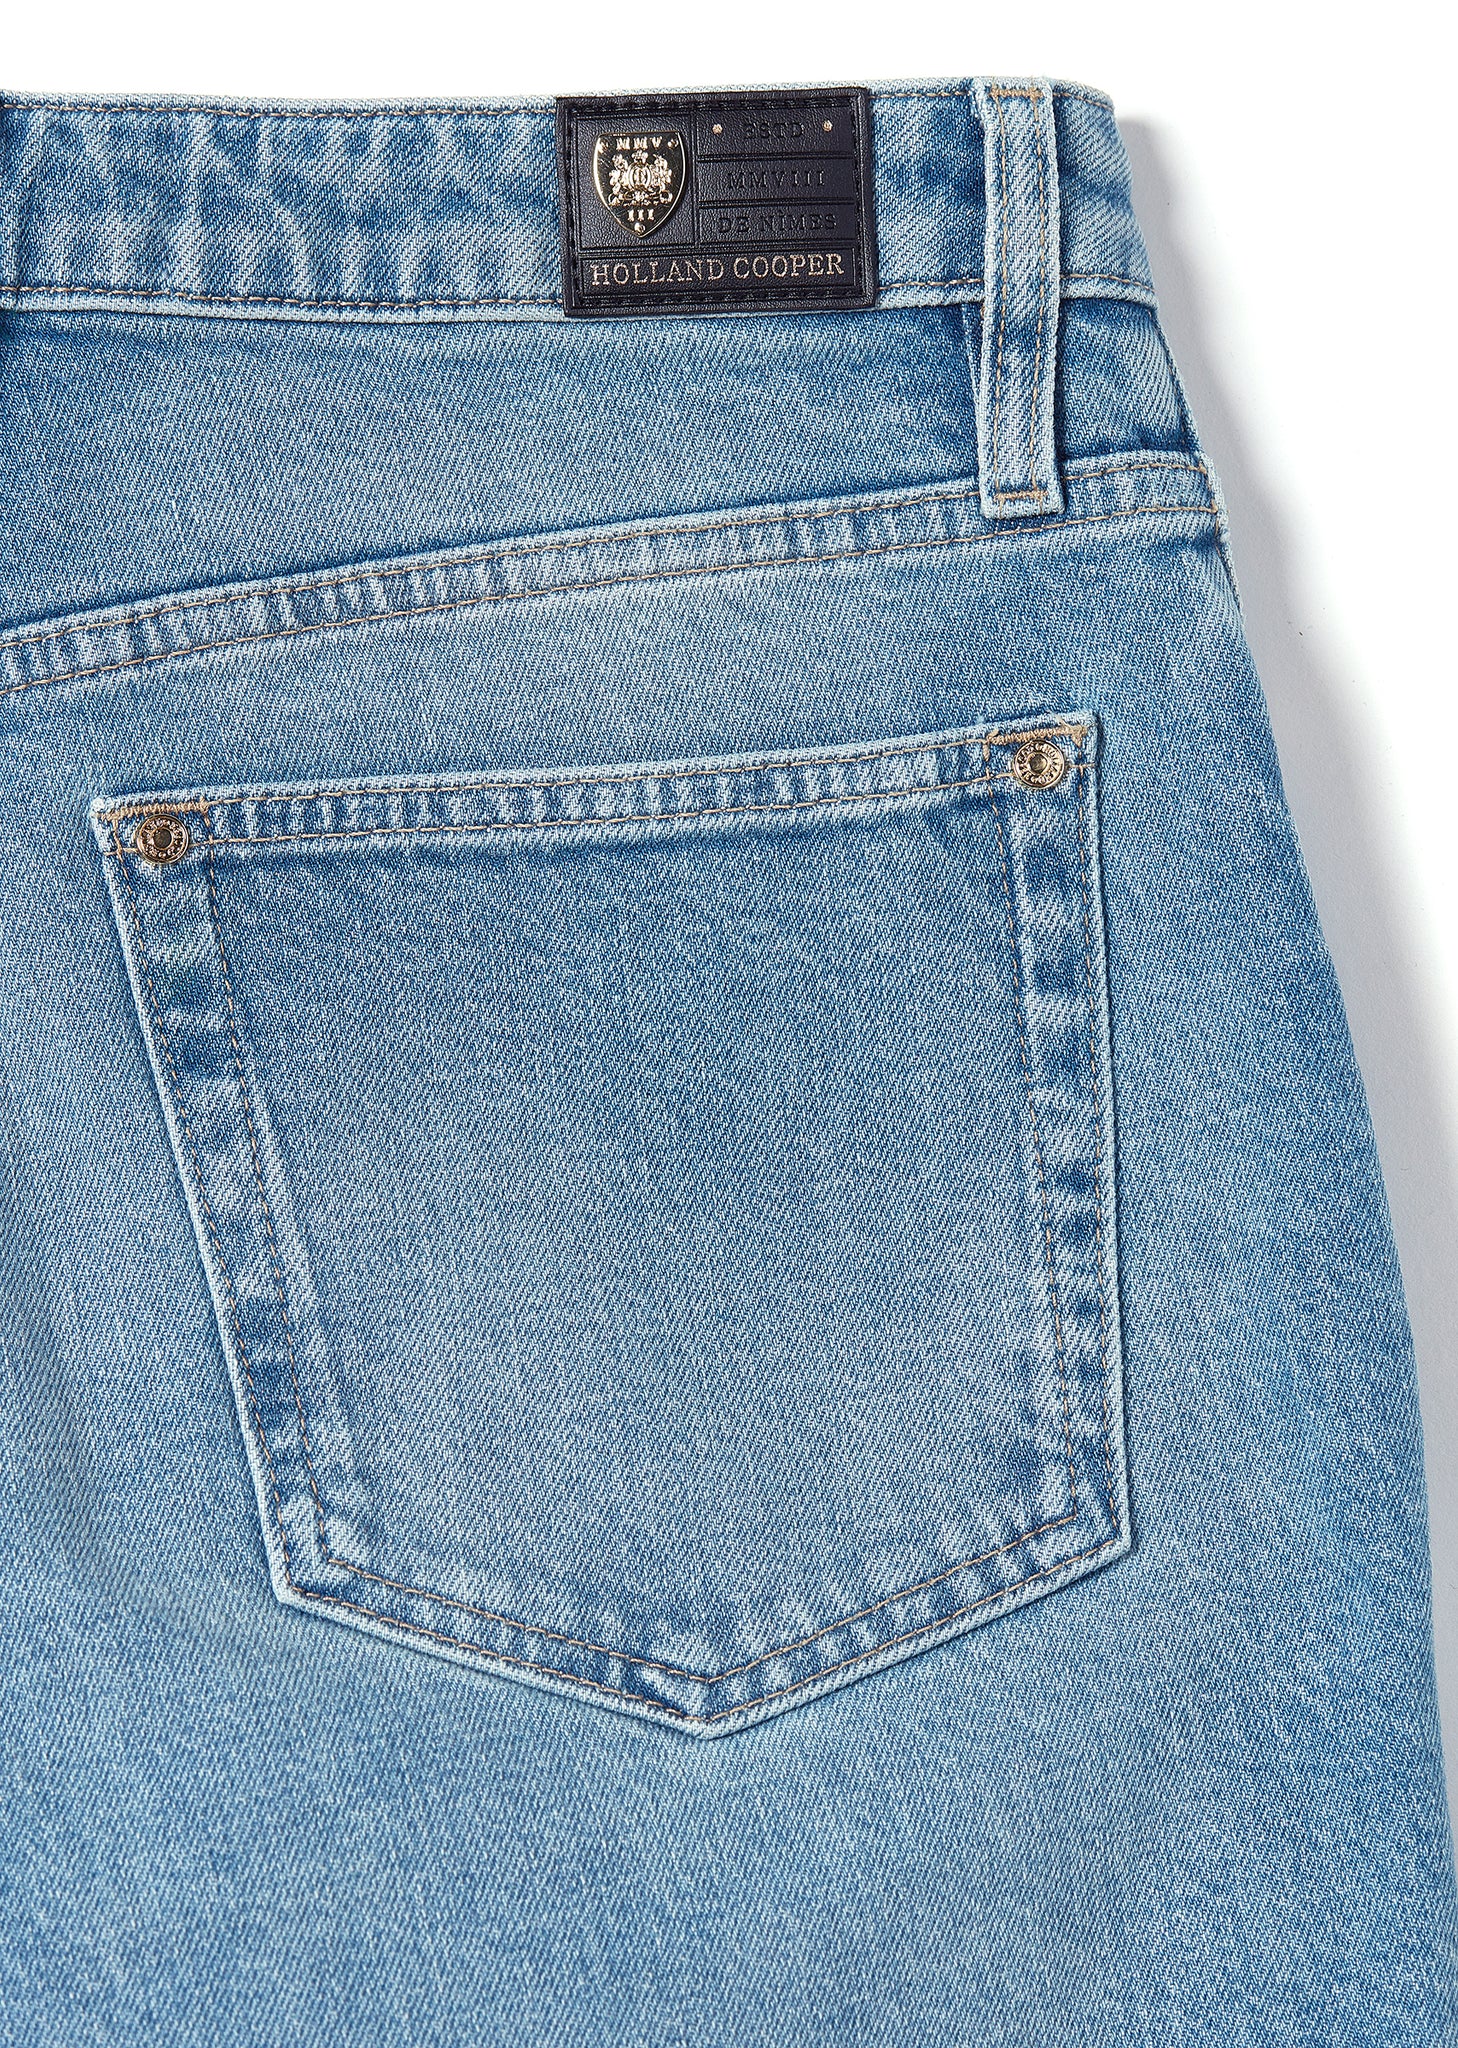 back pocket detail on womens high rise blue denim slim fit jean with raw hem and two open pockets on the front and back with gold stirrup charm to the belt loop